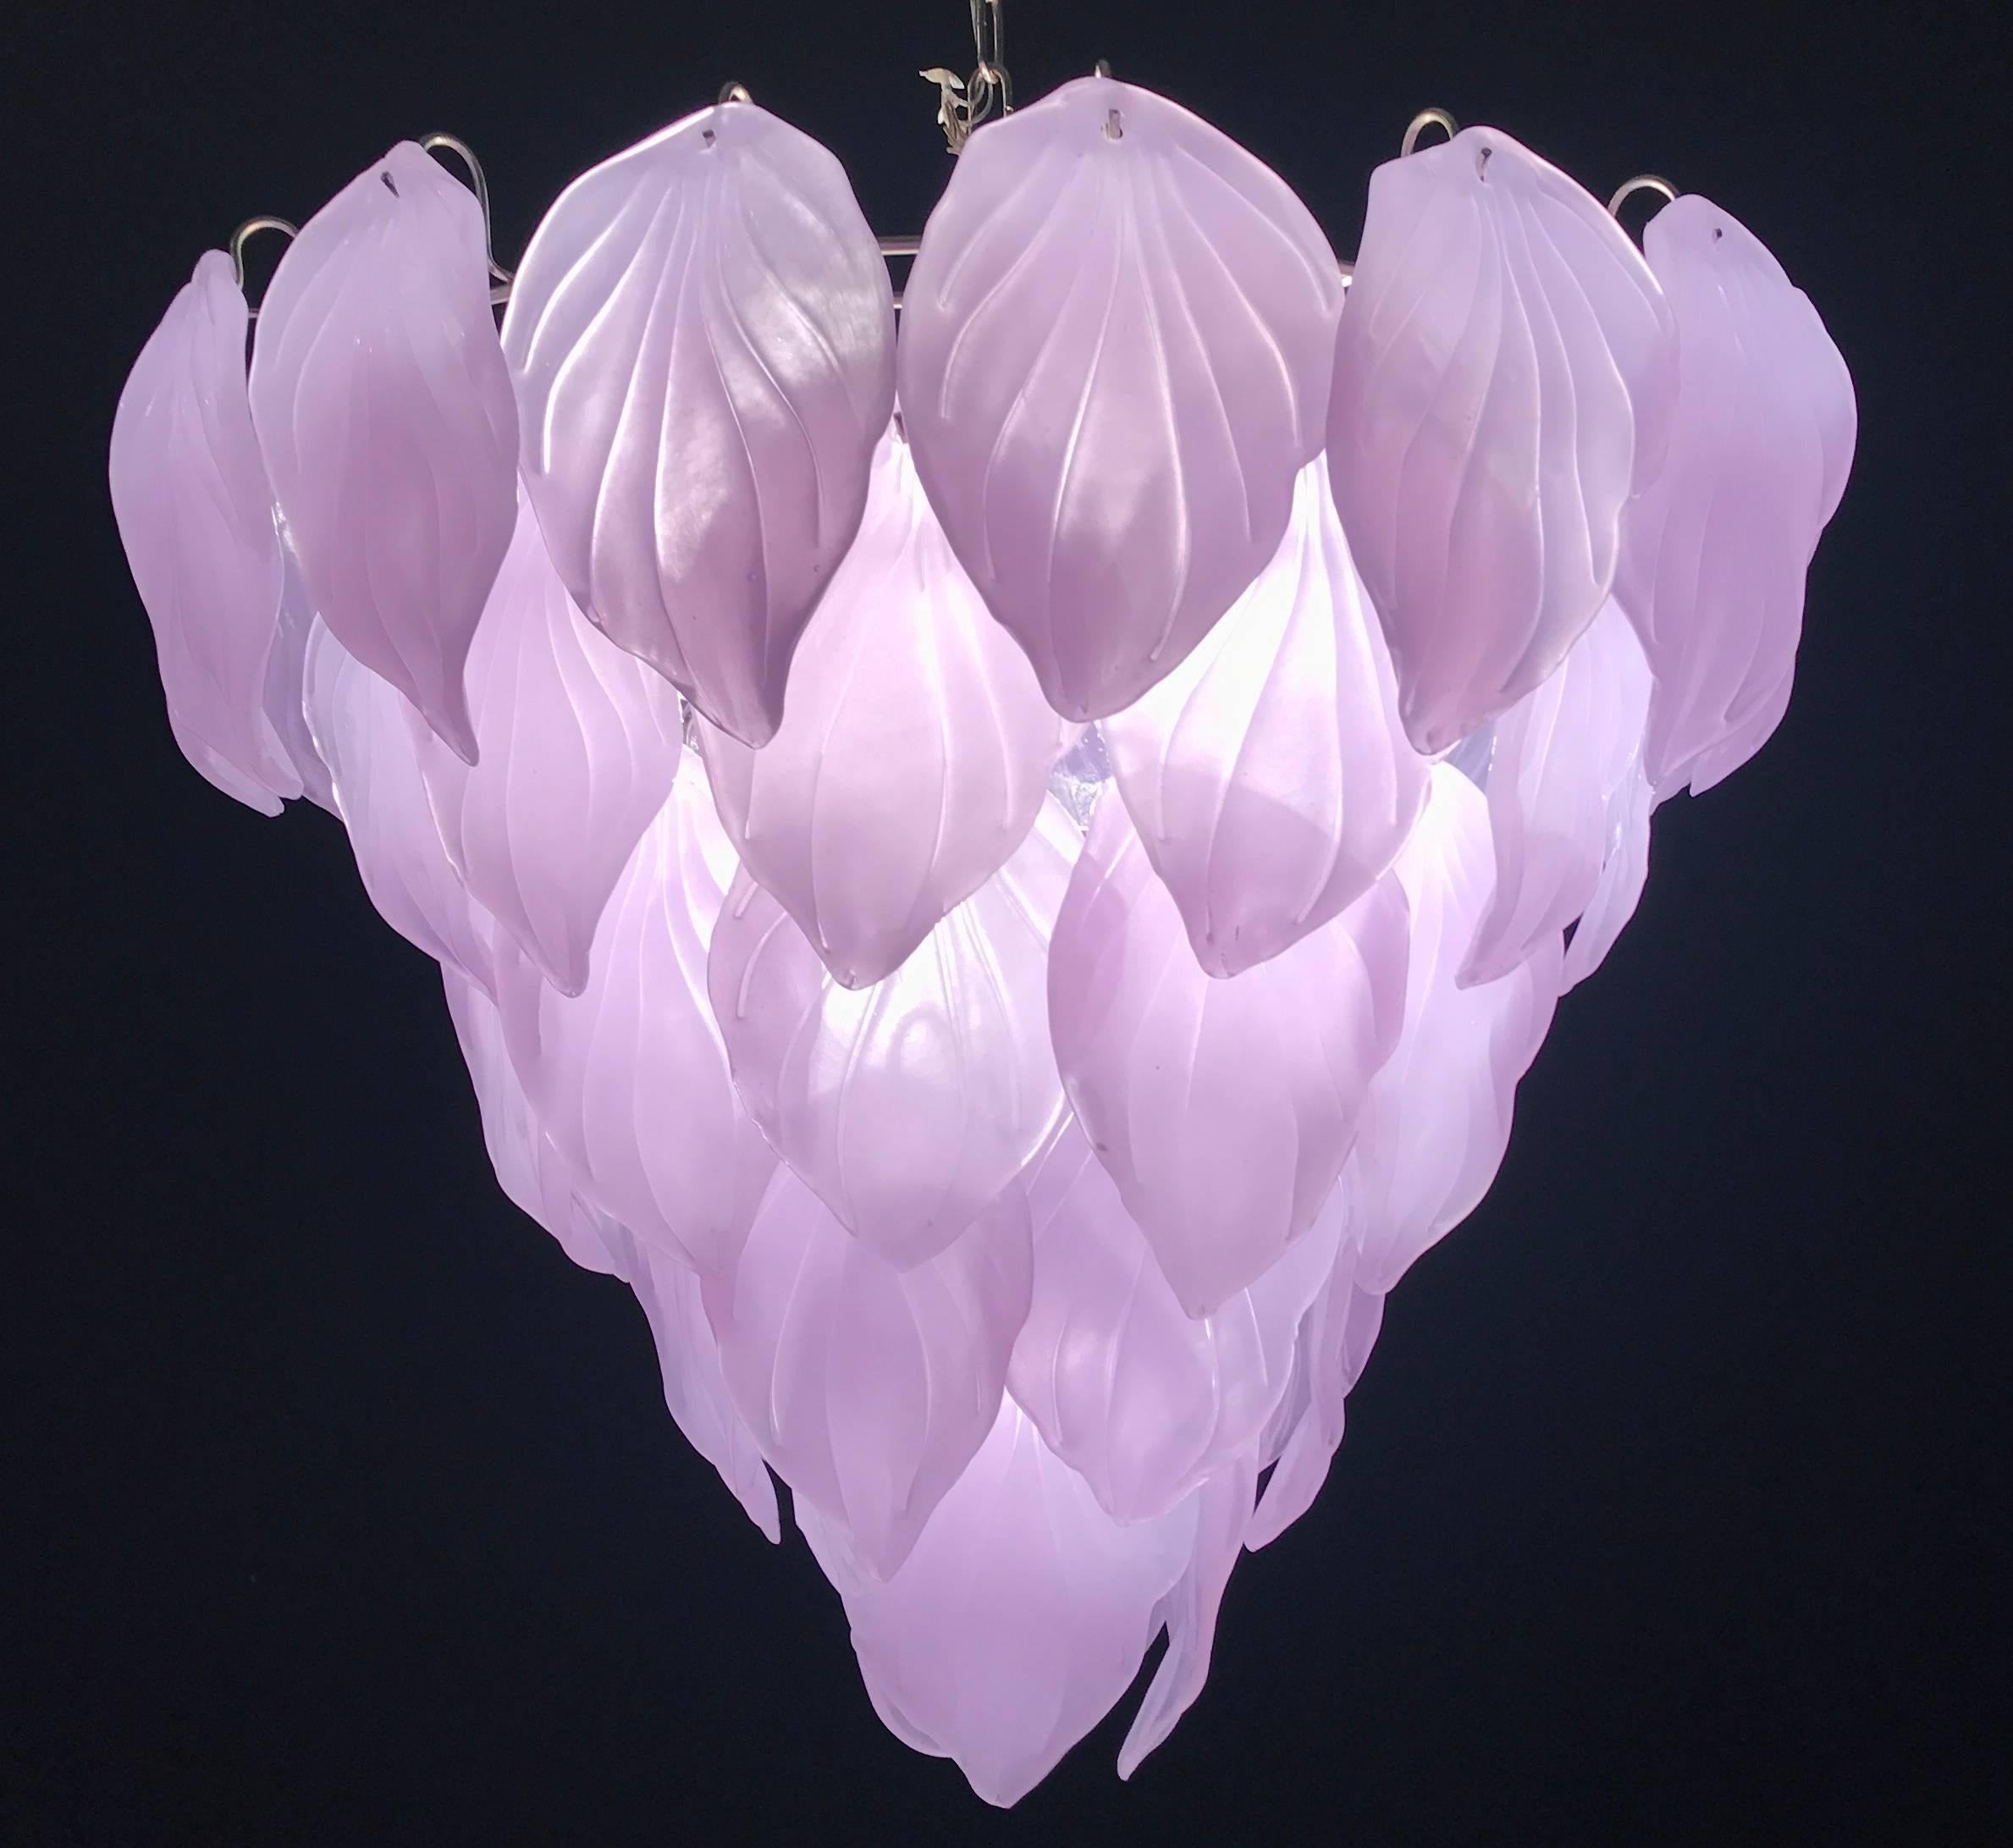 Magic transformation of the glasses color from violet to pink when the light is on. With 50 precious hand blown Murano glass leaves on five levels. Available also a pair and a 2 pairs of sconces.
Measures: Height without chain 65 cm (26 inches).